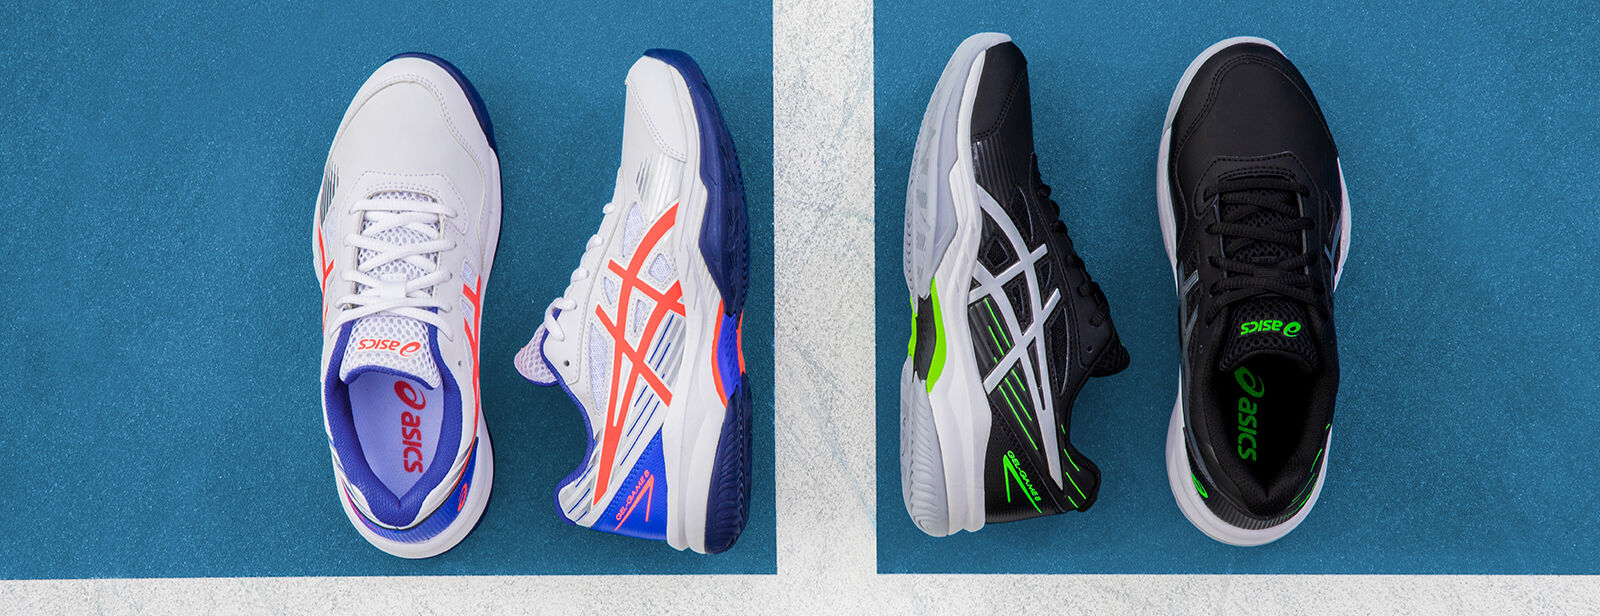 Tennis Shoes To Wear On Grass, Clay, And Hard Courts | ASICS